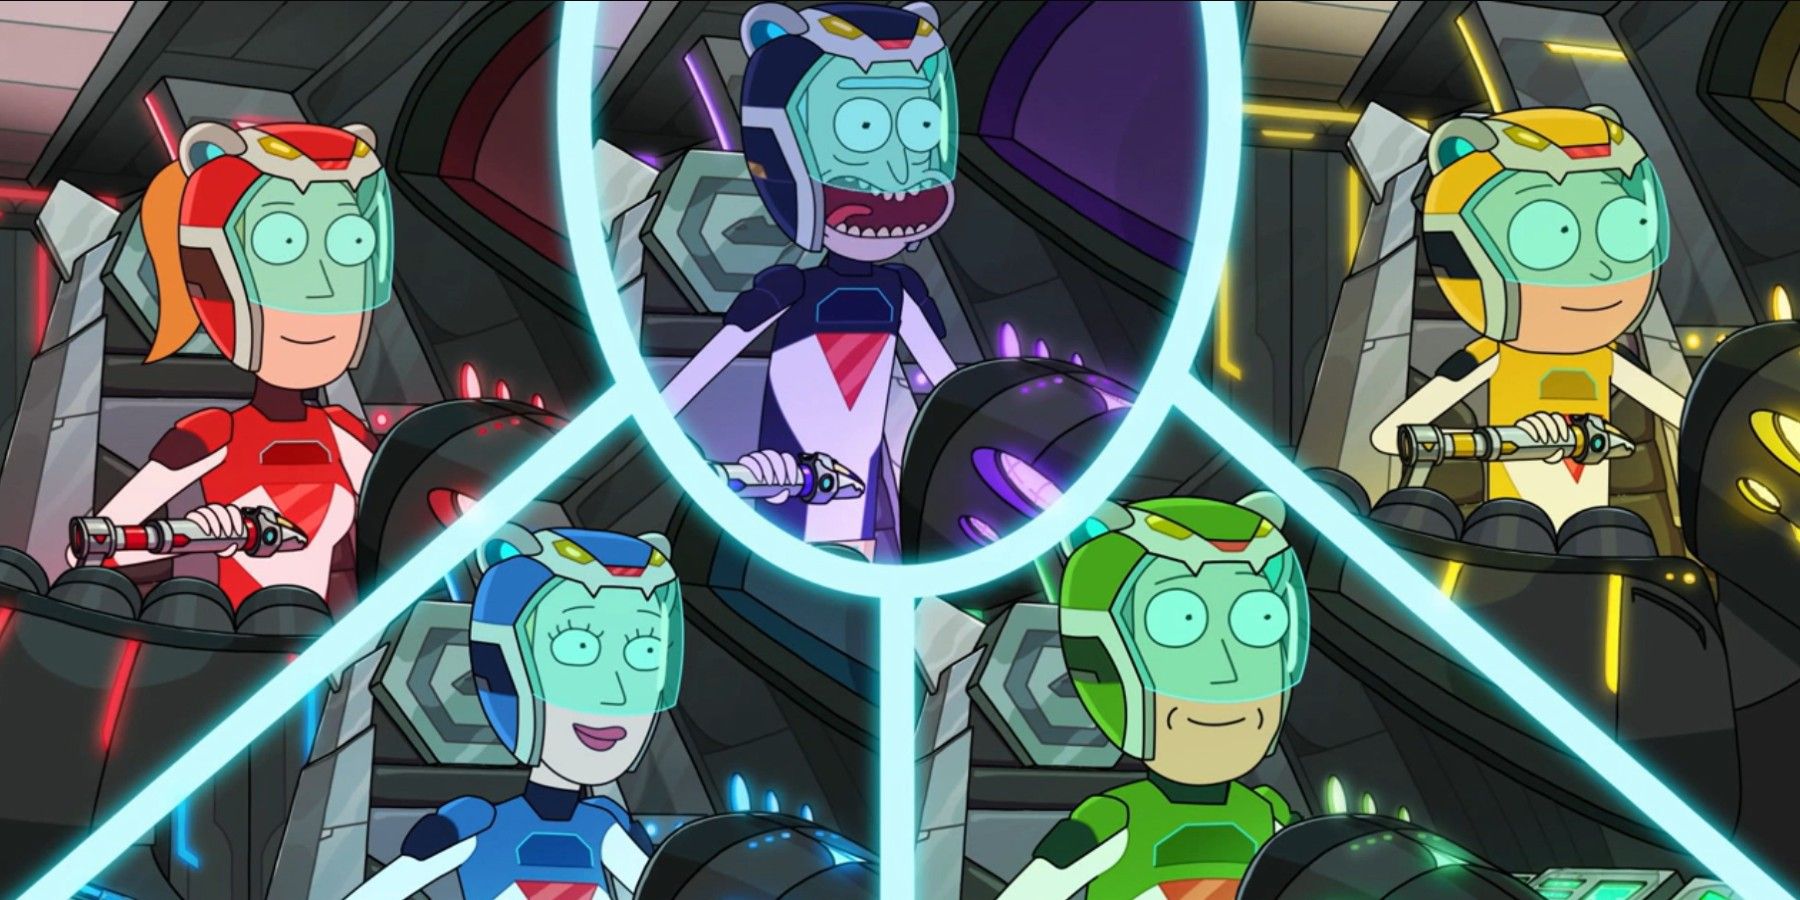 The Gotron team in Rick and Morty